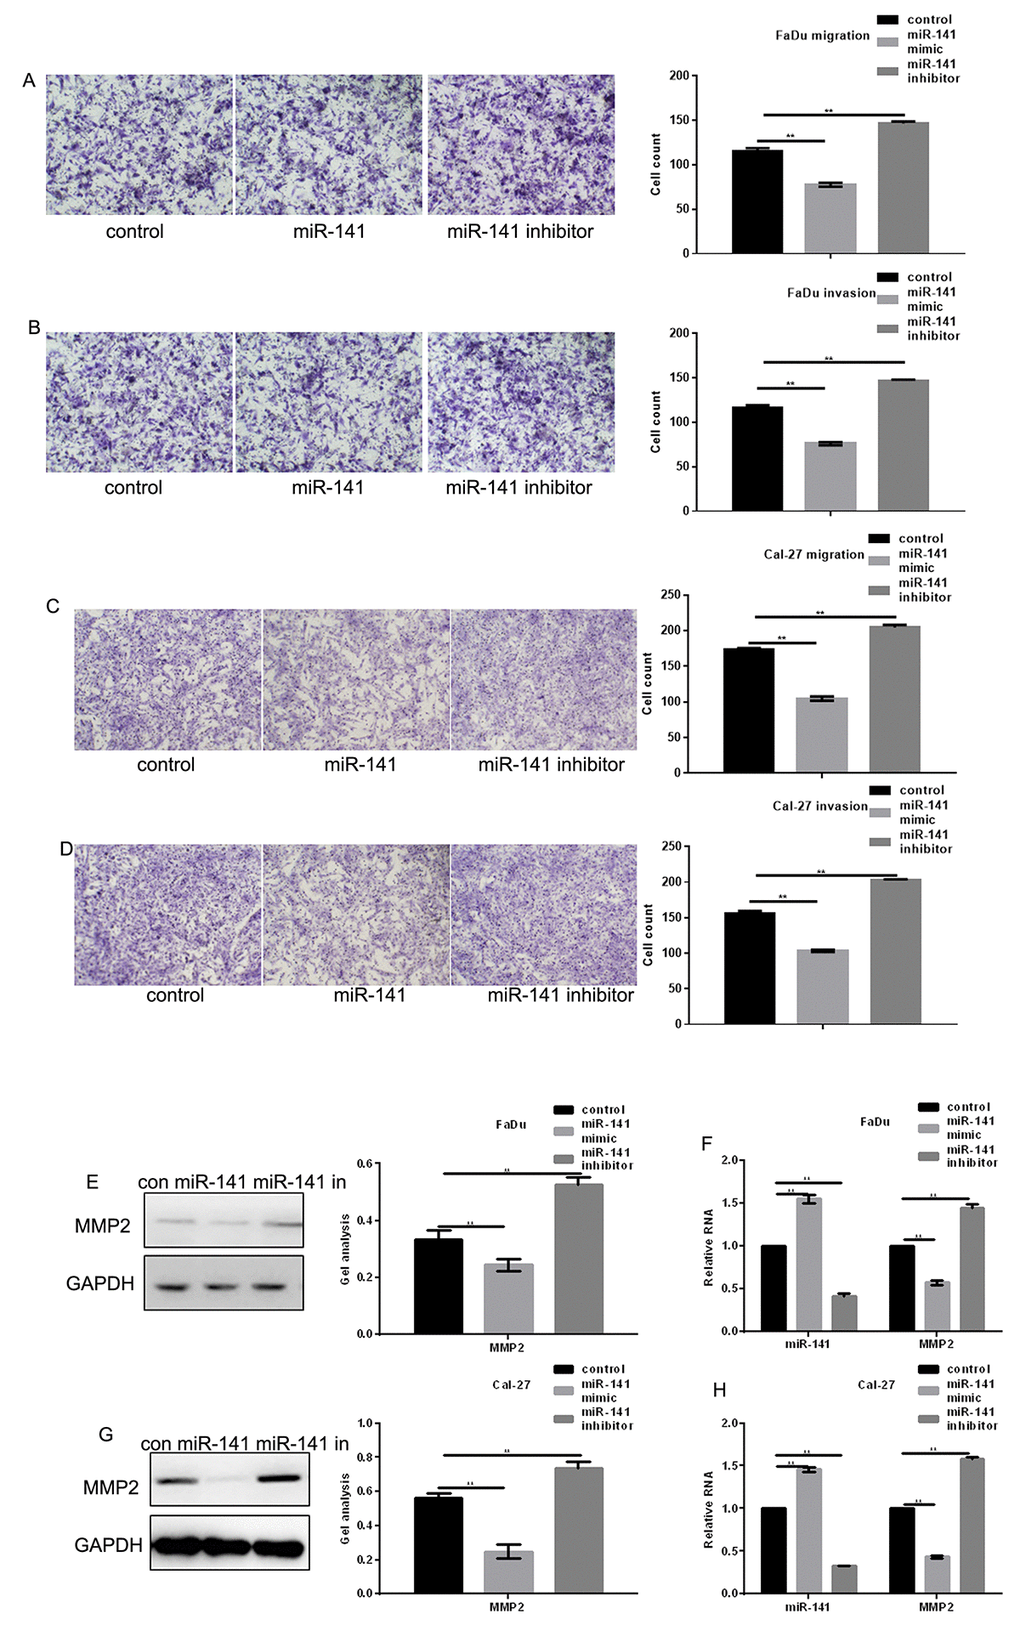 MiR-141 inhibits HNSCC metastasis. (A-D) Transwell assays with and without Matrigel showing the effect of miR-141 on FaDu and Cal-27 cell migration and invasion. Left panels: representative images of migrated cells under the indicated conditions. Right panels: Group data showing counts of migrated cells. Bars depict the mean ± SD of three experiments. (E-H) Western blots and real-time PCR the effect of miR-141 mimic and inhibitor on MMP2 expression in FaDu and Cal-27 cells. Bars depict the mean ± SD. ** P